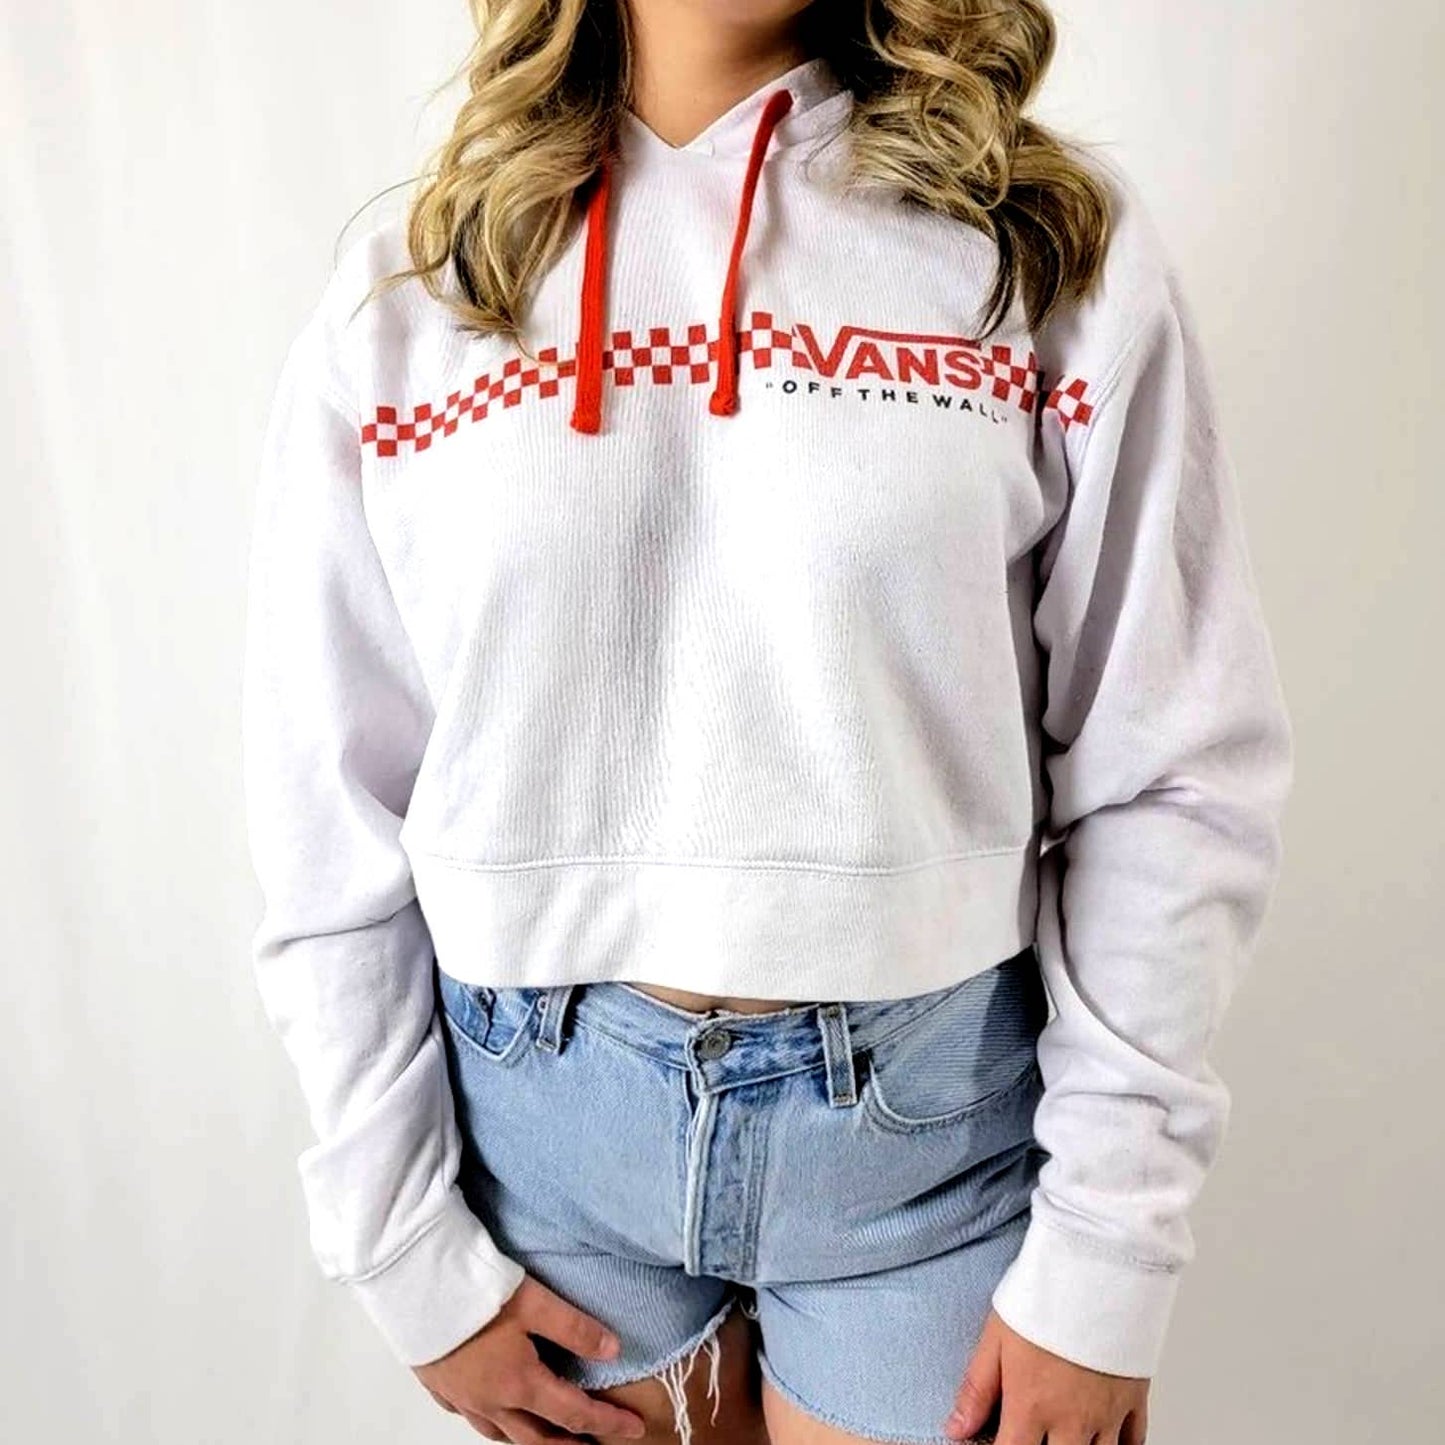 Vans Checkered Red Logo Cropped Hooded Sweatshirt - L